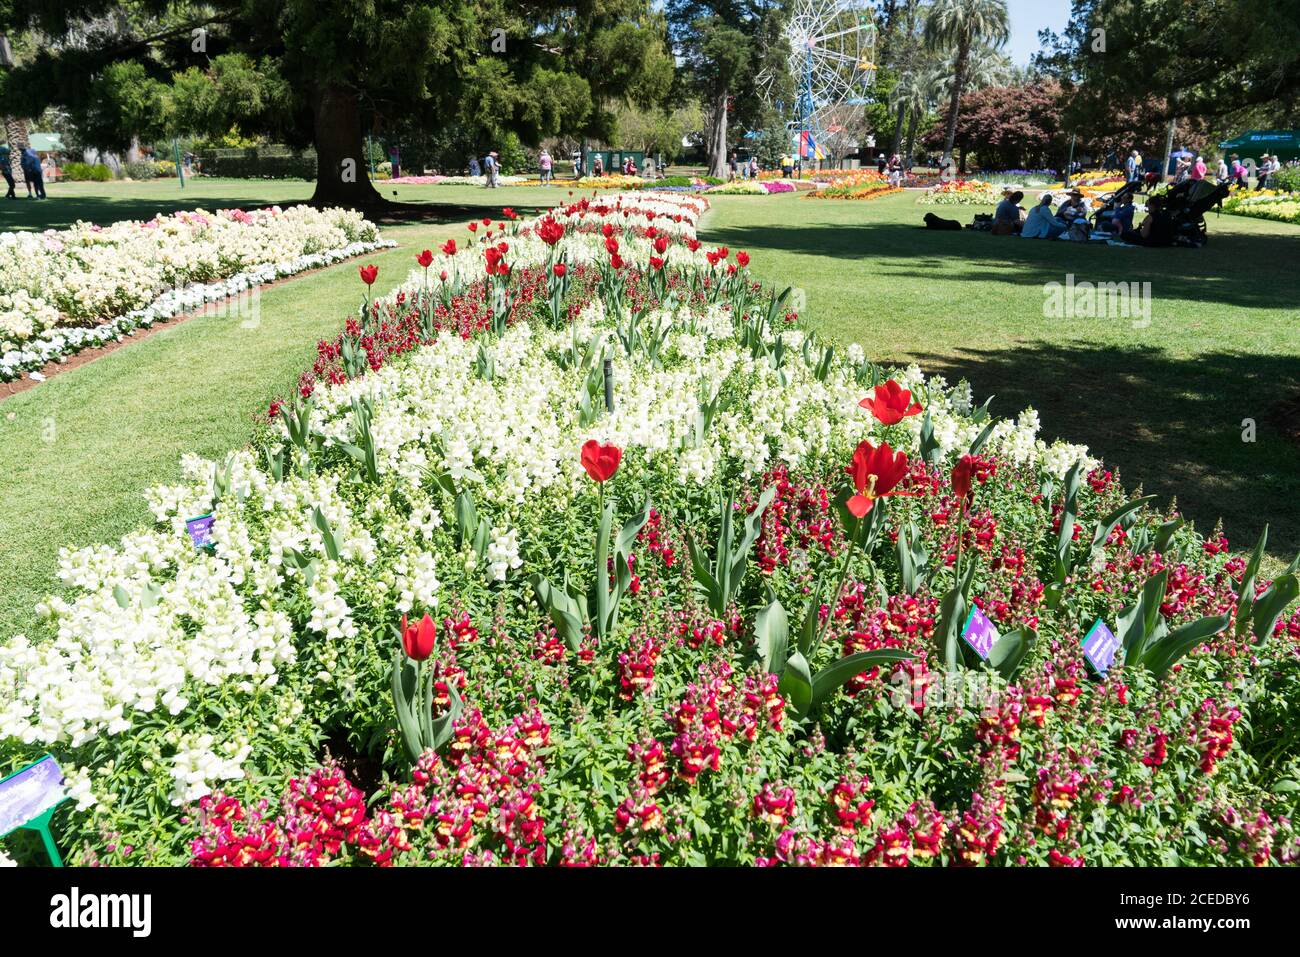 Families enjoying a day out at the Toowoomba Carnival of Flowers with a beautiful display of red and white snapdragons Stock Photo